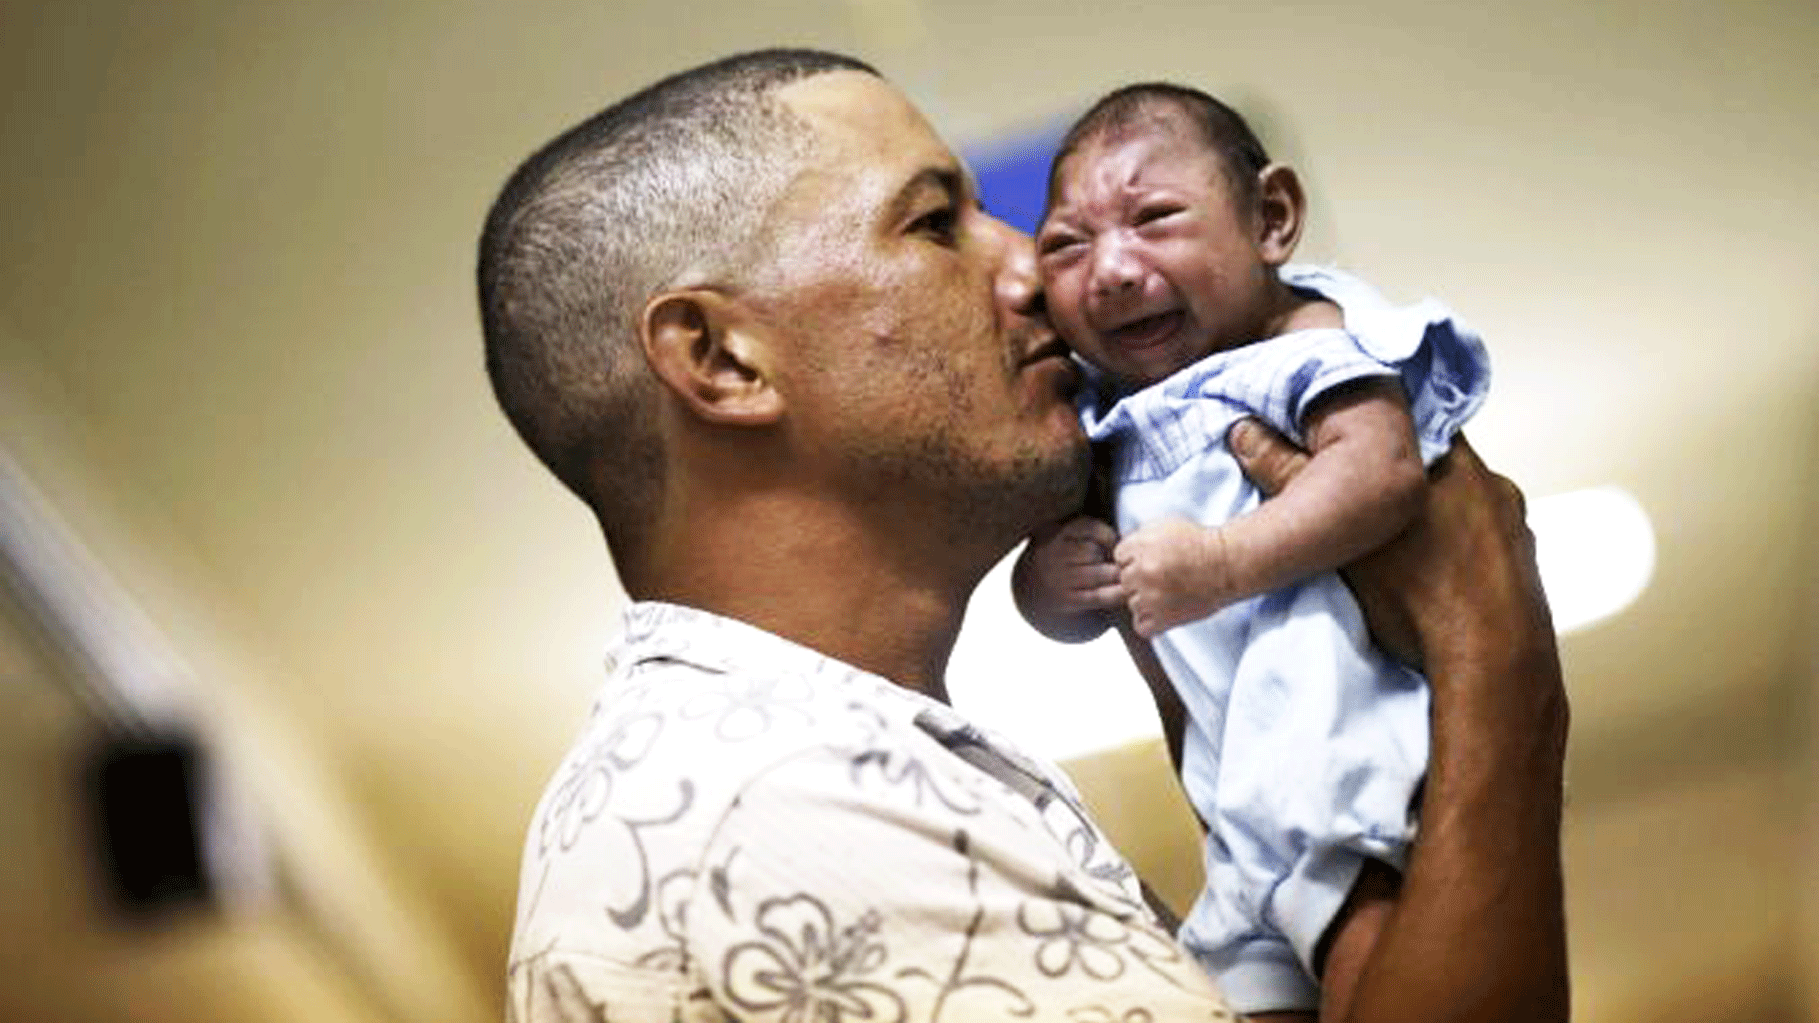  The World Health Organization said earlier in the week that the virus could infect up to 4 million people this year. Authorities in Brazil suspect that the disease could potentially be linked to a condition called microcephaly, in which newborns have a shrunk head. (Photo: Reuters)